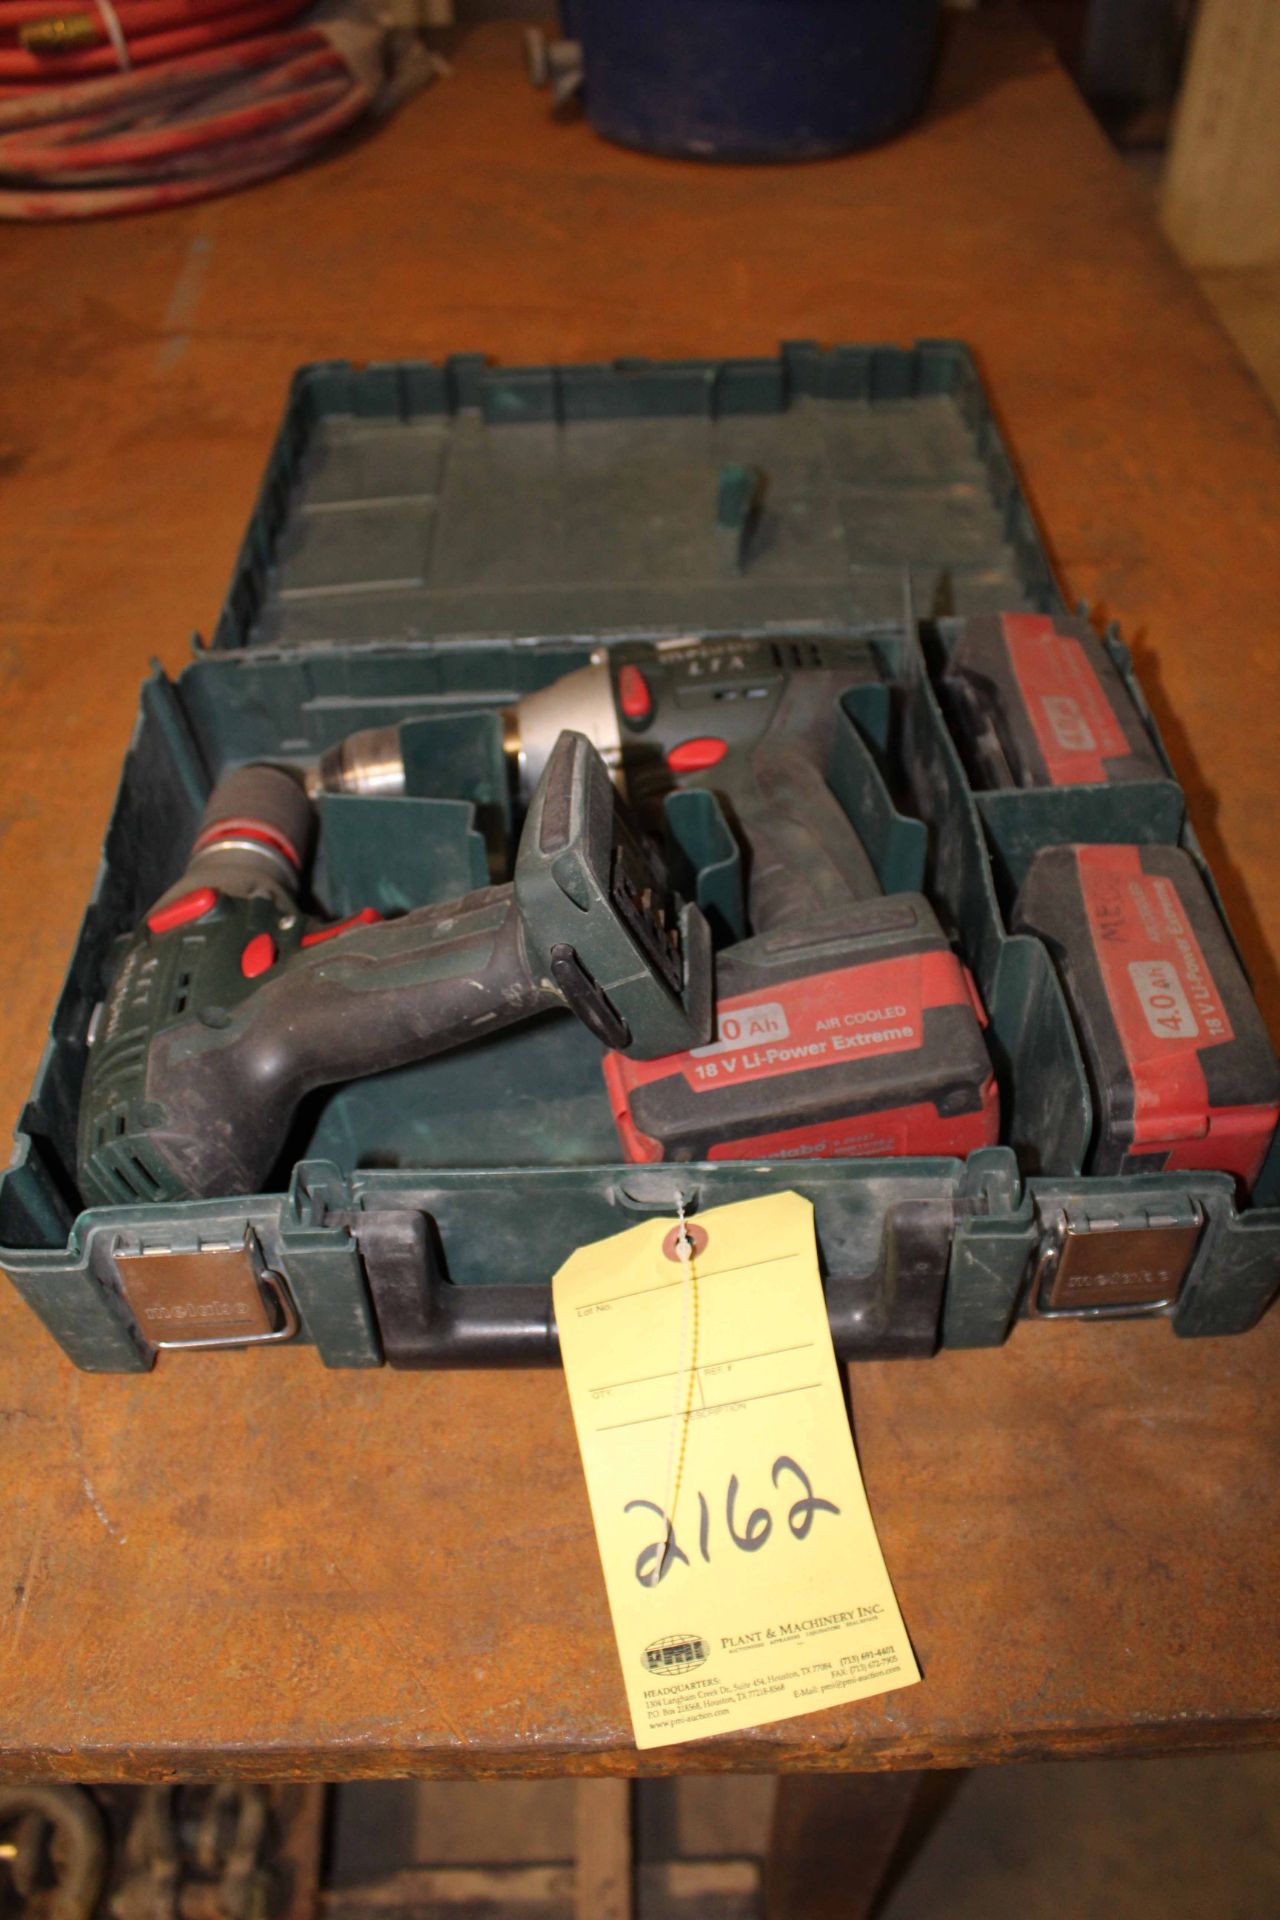 LOT OF CORDLESS DRILLS, METABO, w/batteries (no chargers)